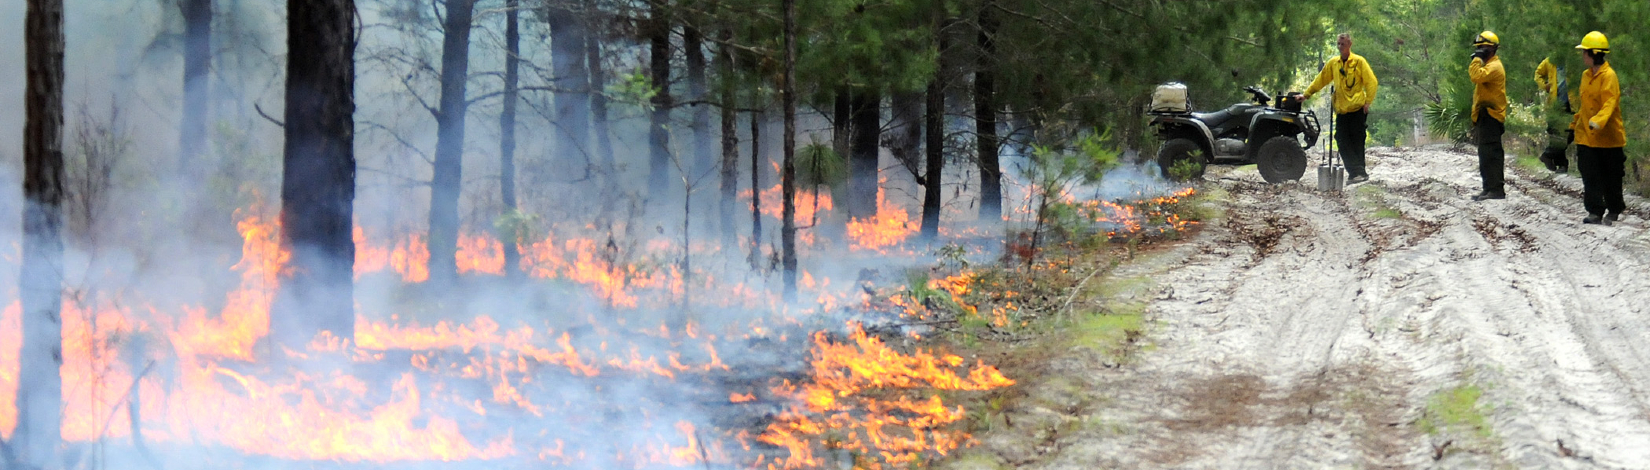 researchers observing a controlled burn in a pine forest